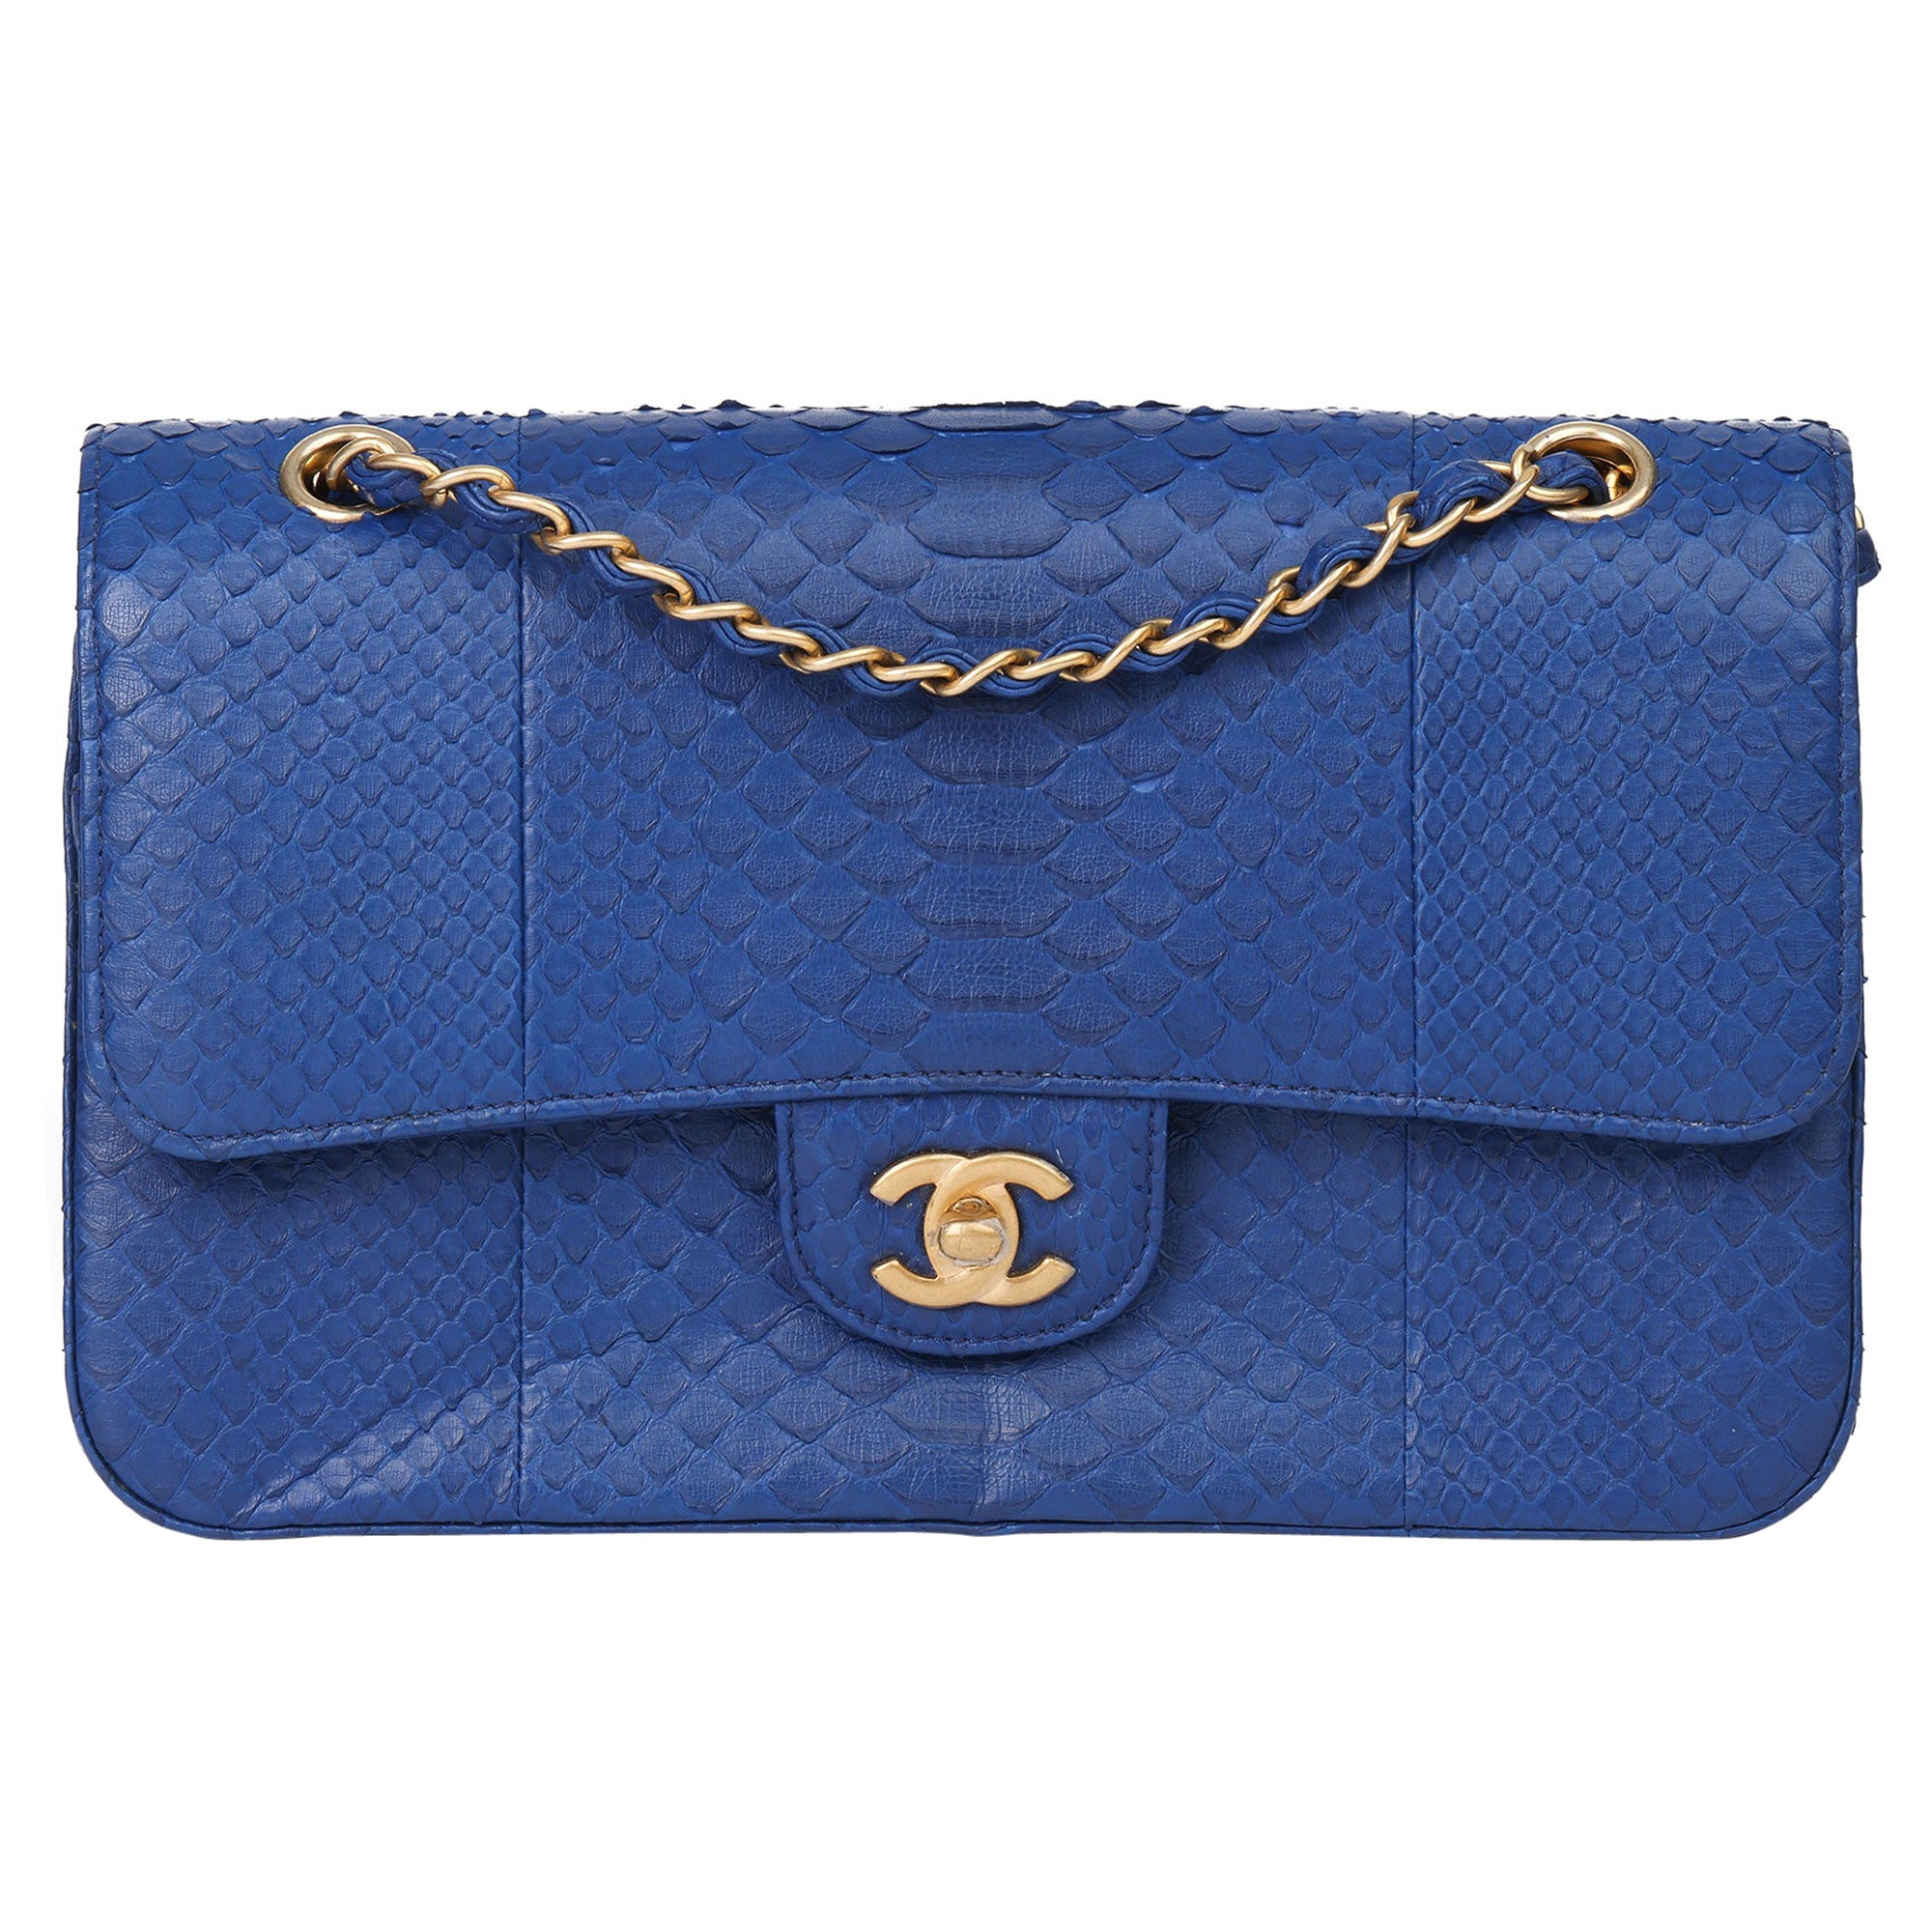 2017 Chanel Blue Python Leather Medium Classic Double Flap Bag at